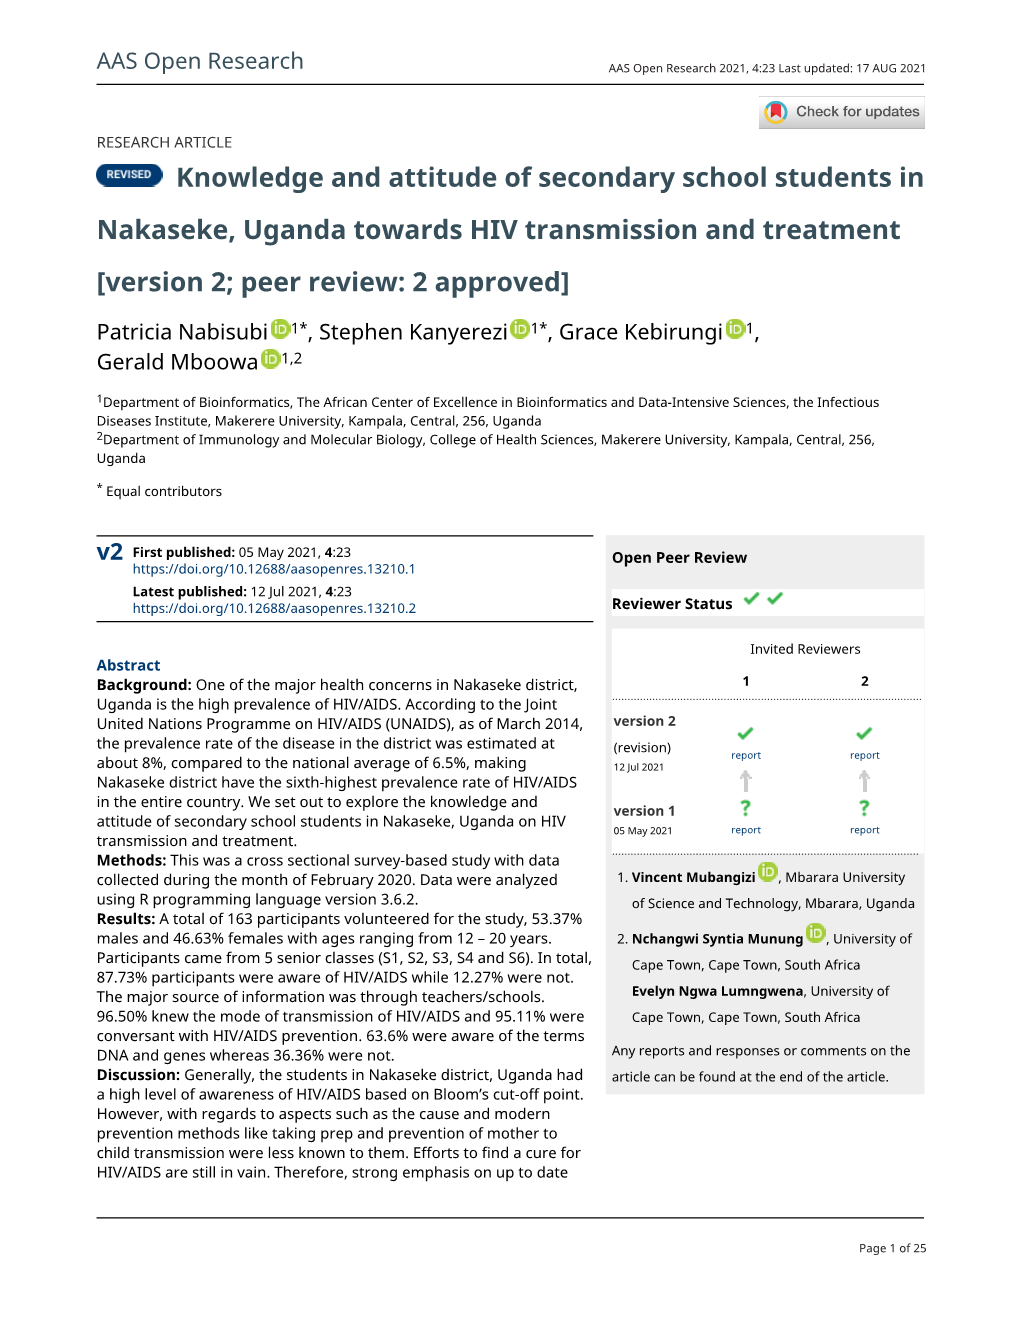 Knowledge and Attitude of Secondary School Students In